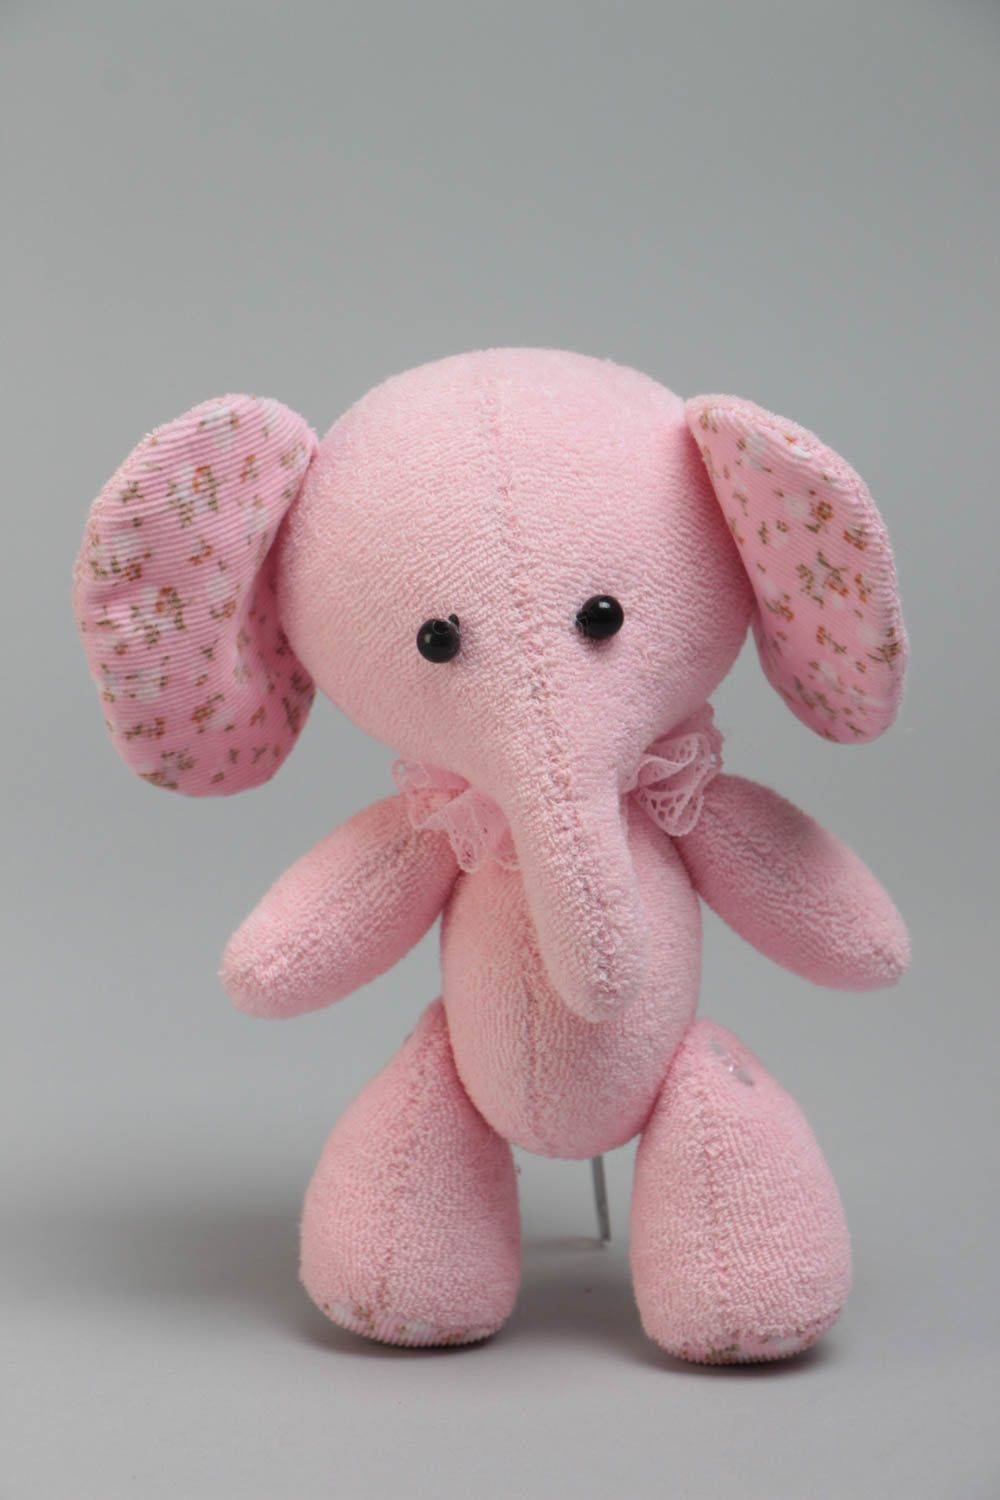 Handmade small mohair and jersey fabric soft toy pink elephant for children photo 2